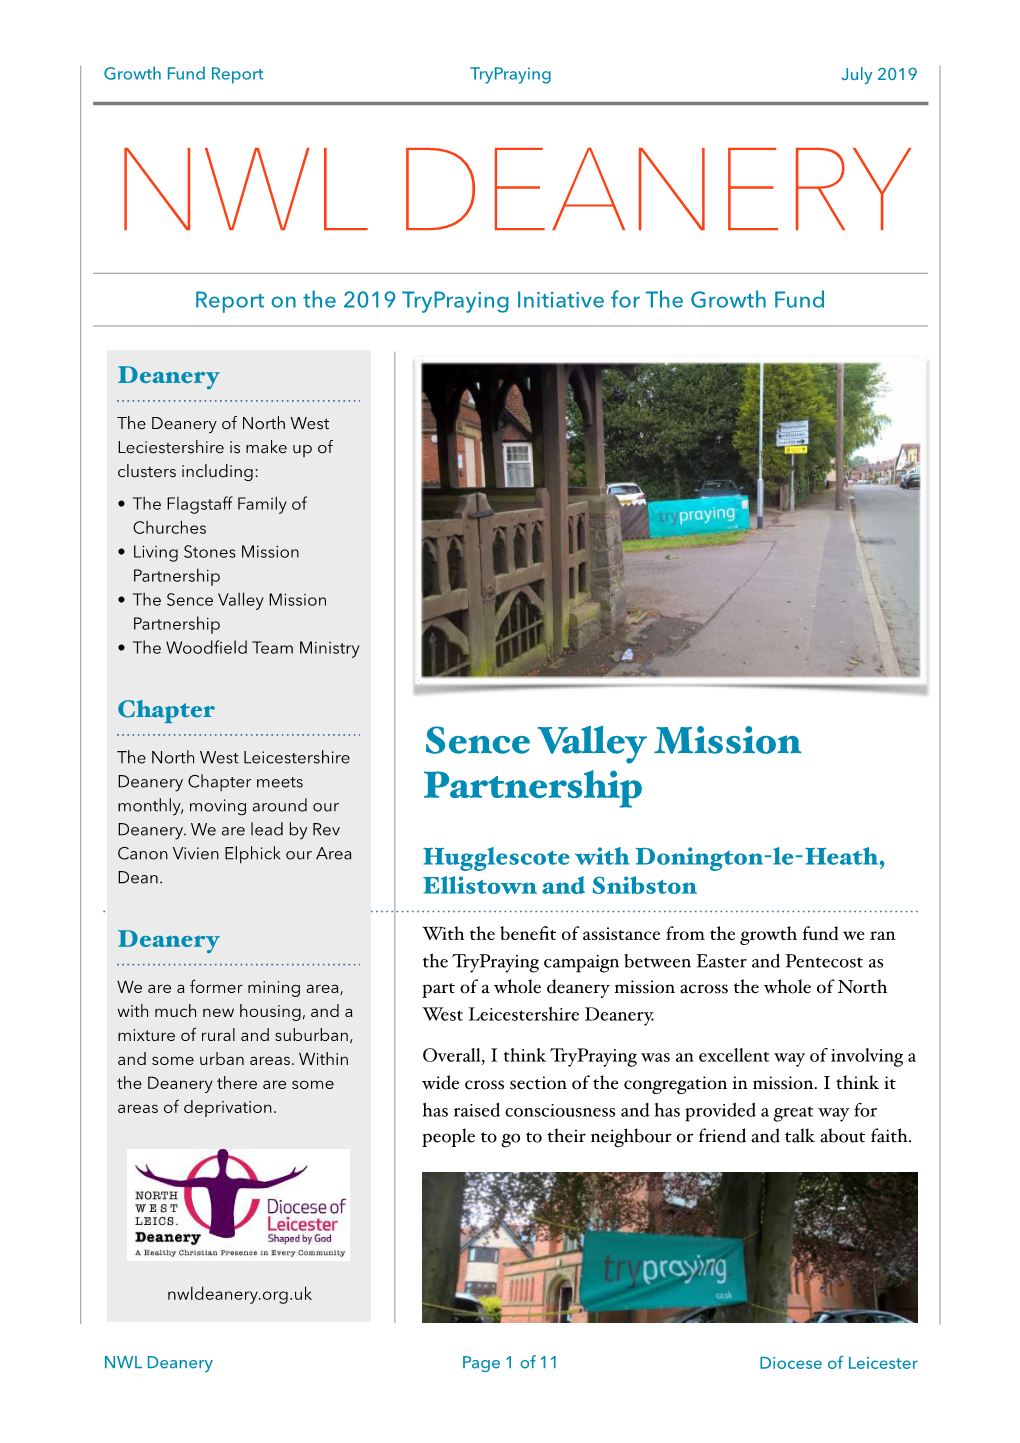 Sence Valley Mission Partnership • the Woodﬁeld Team Ministry